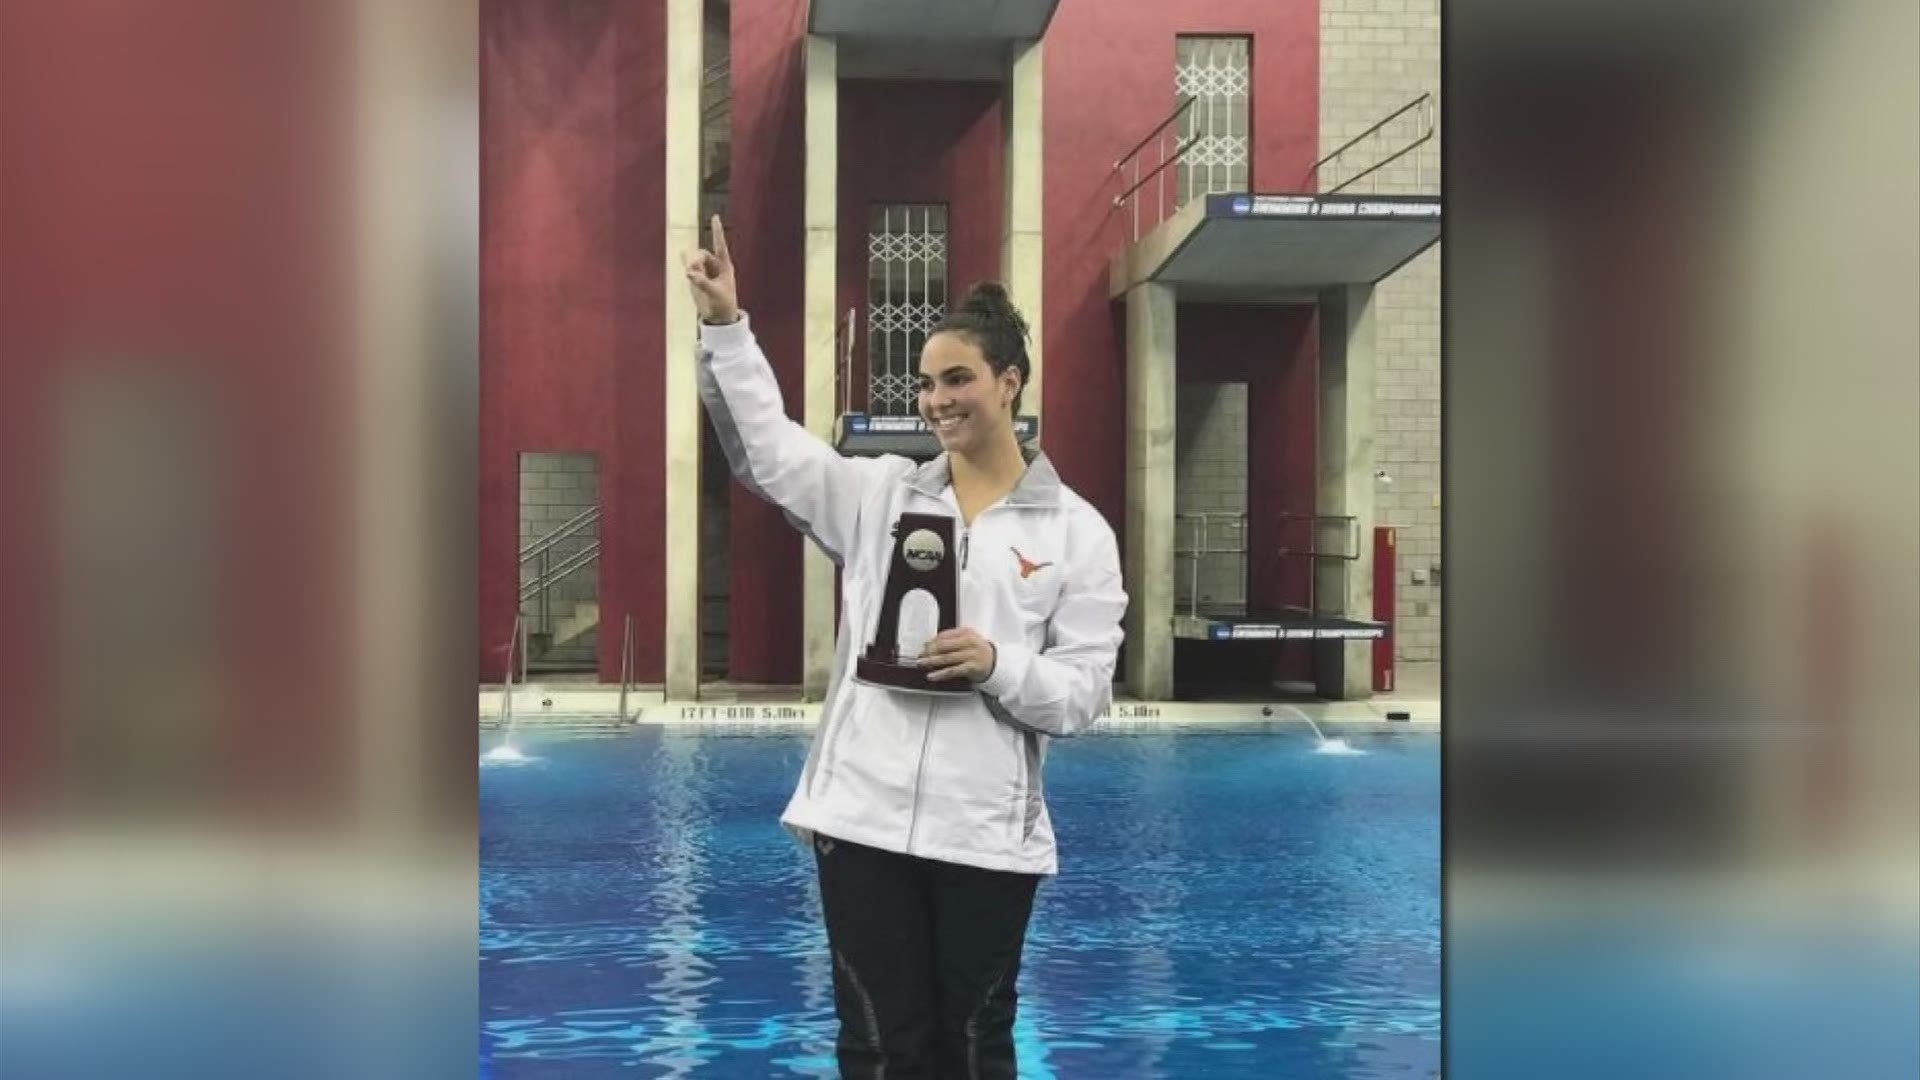 A local diver is competing in the Olympic trials.